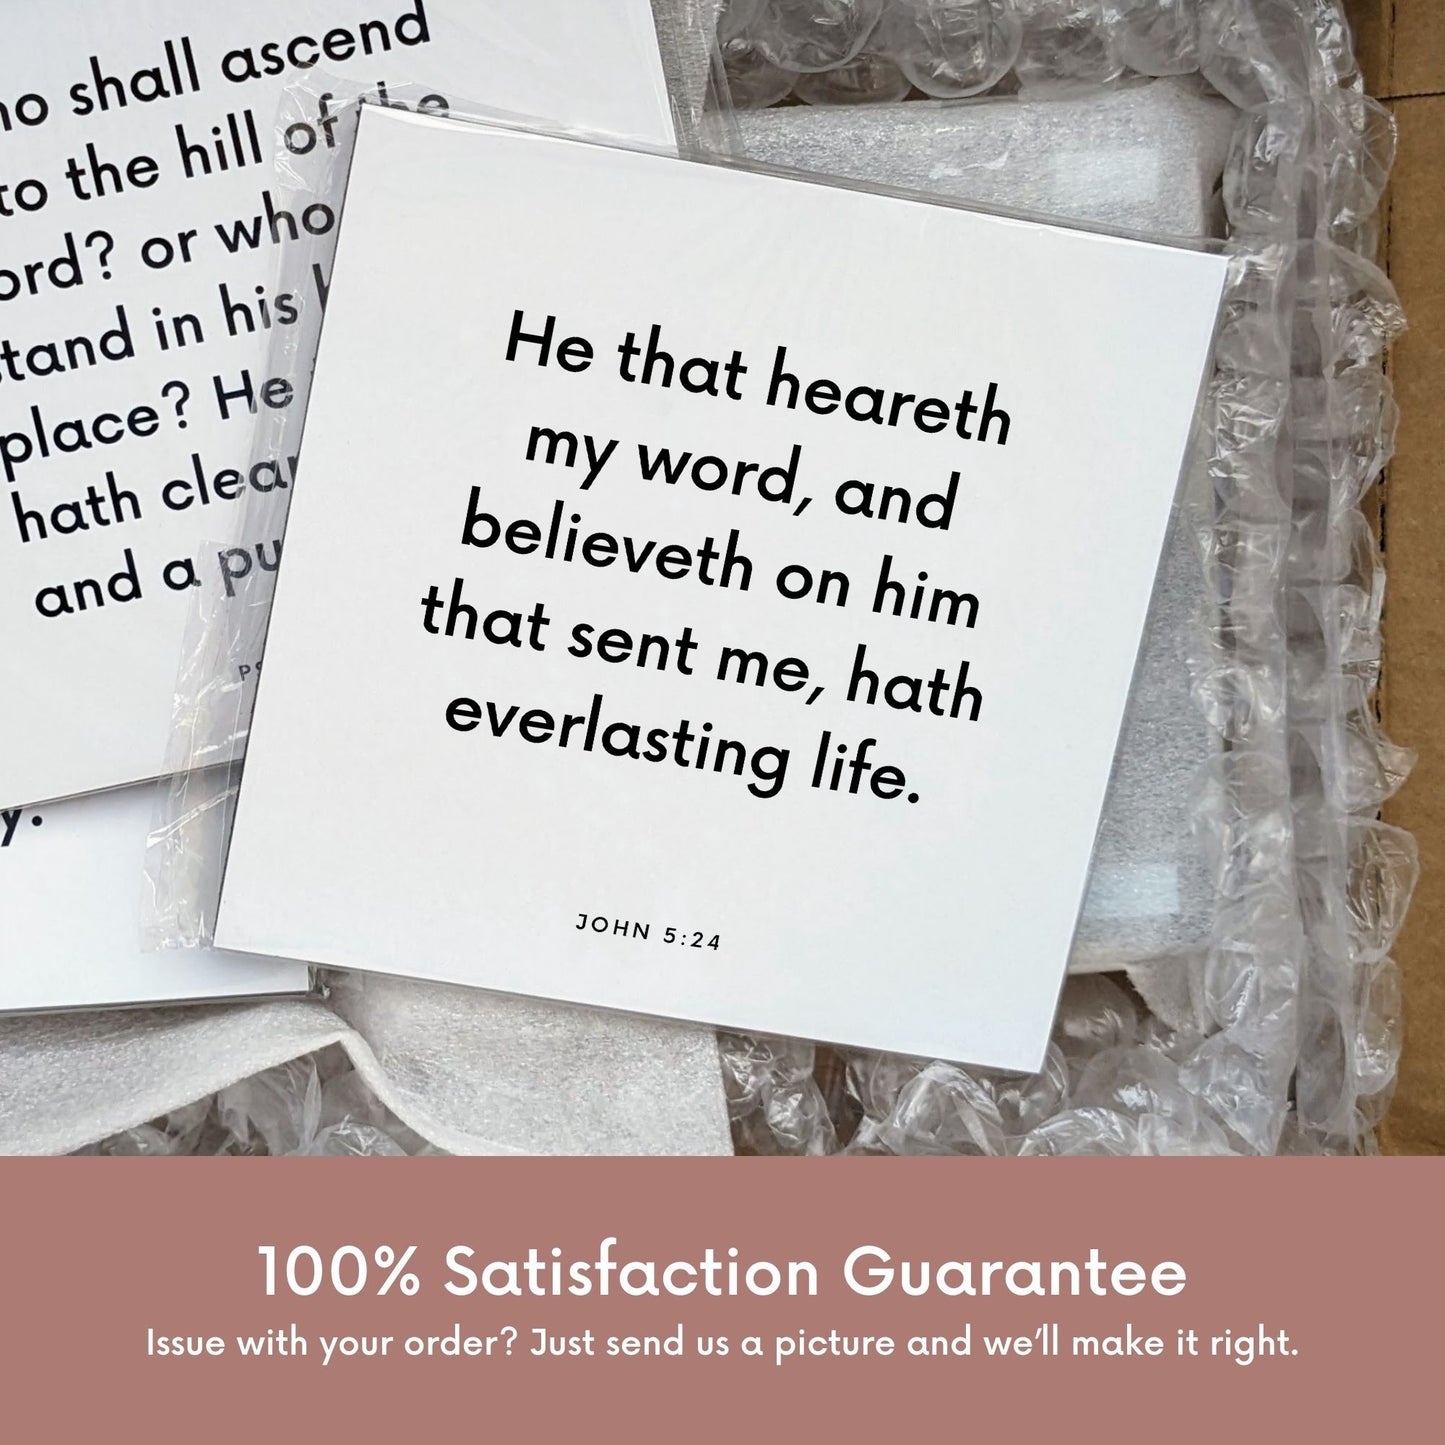 Shipping materials for scripture tile of John 5:24 - "He that heareth my word hath everlasting life"